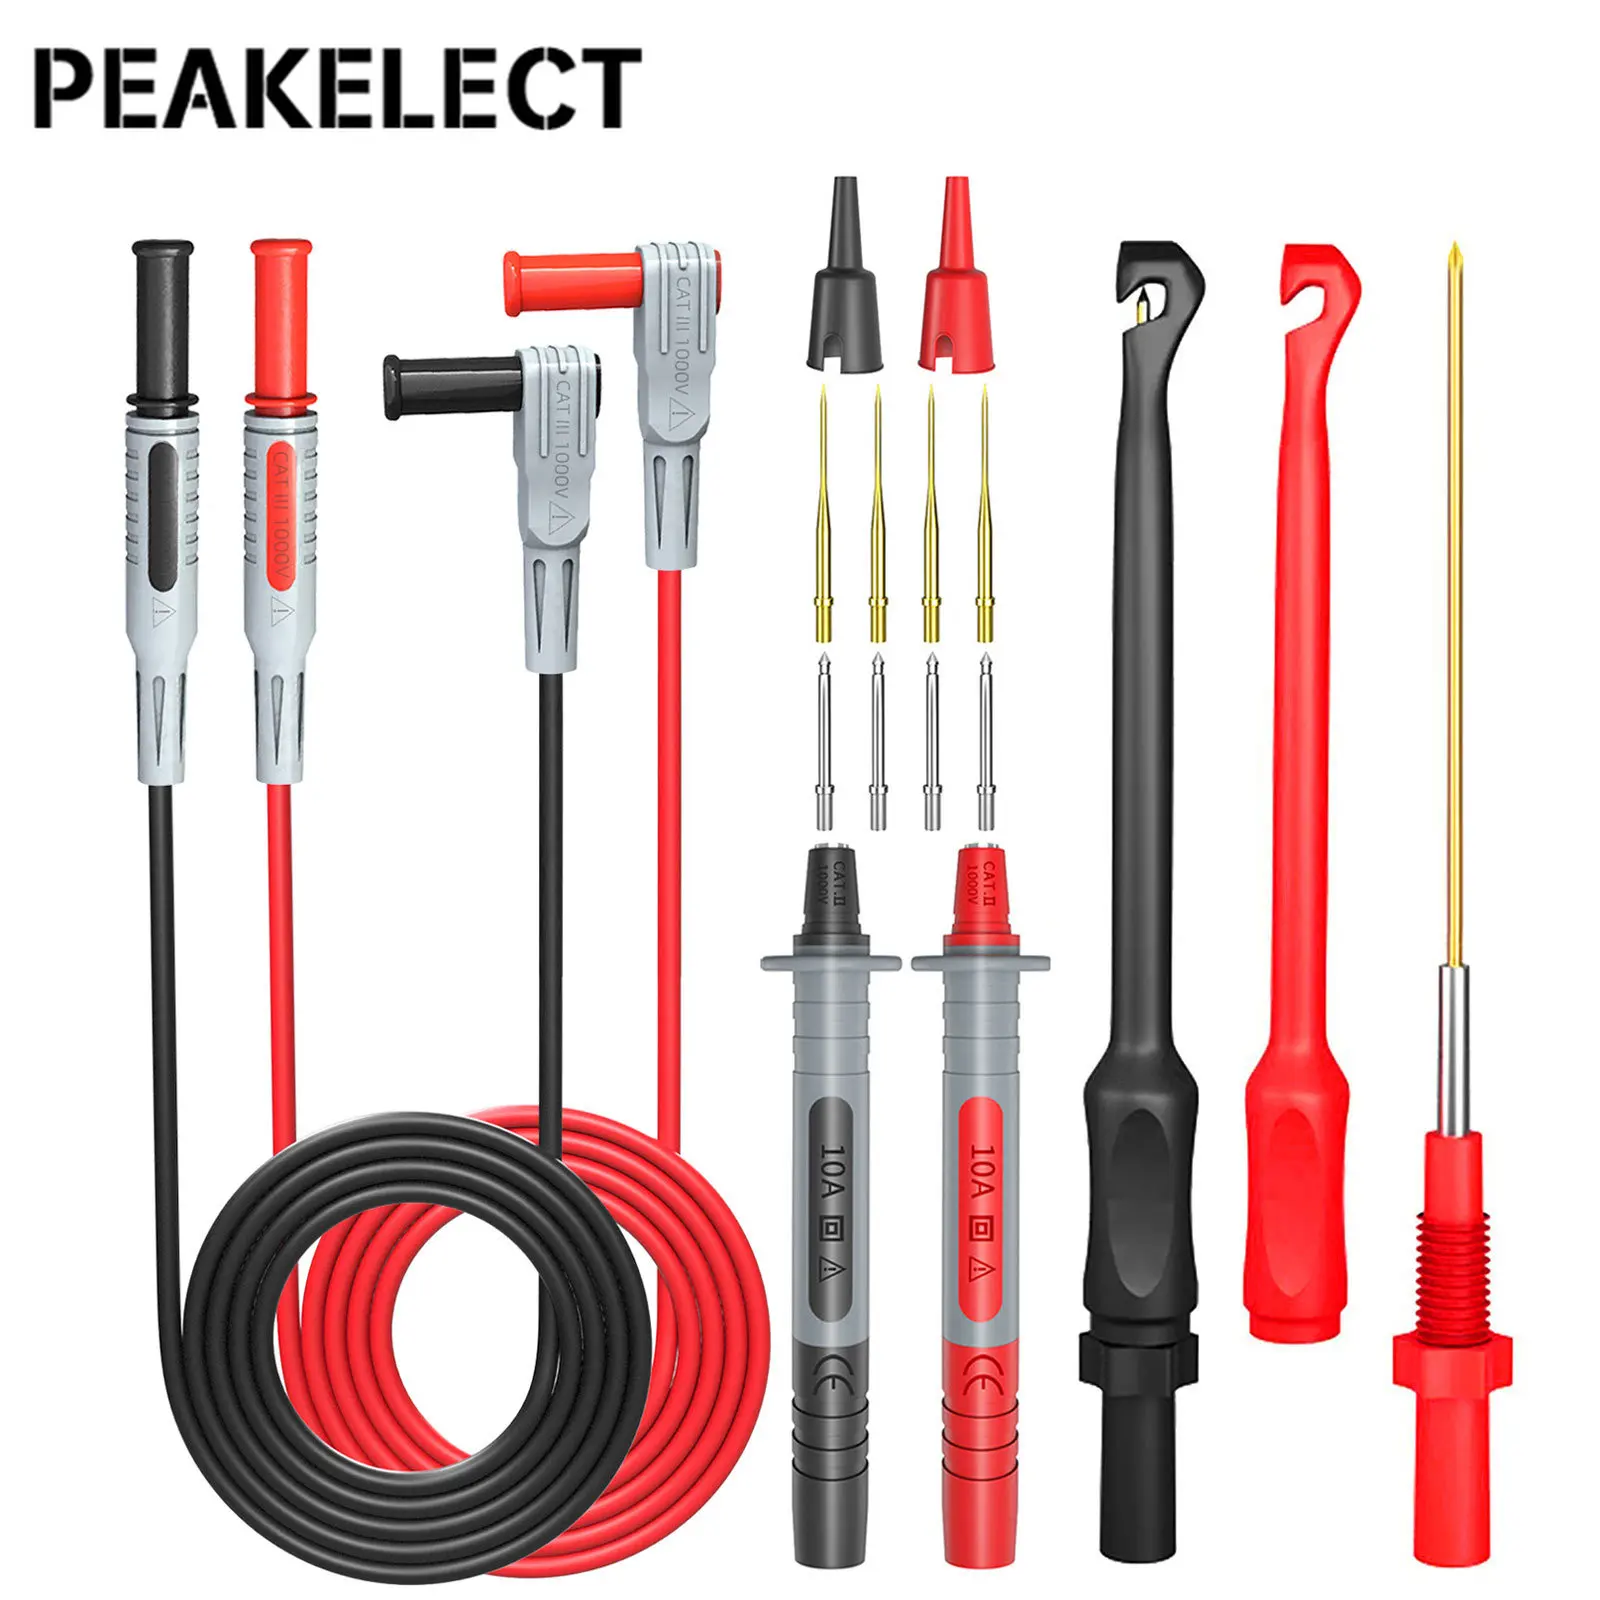 cleqee p30039 2pcs insulation wire piercing puncture probe test hook clip with 2mm 4mm socket automotive car repair Peakelect P1033B Multimeter Test Probes Leads Kit with Wire Piercing Puncture 4mm Banana Plug Test Leads Test Probes